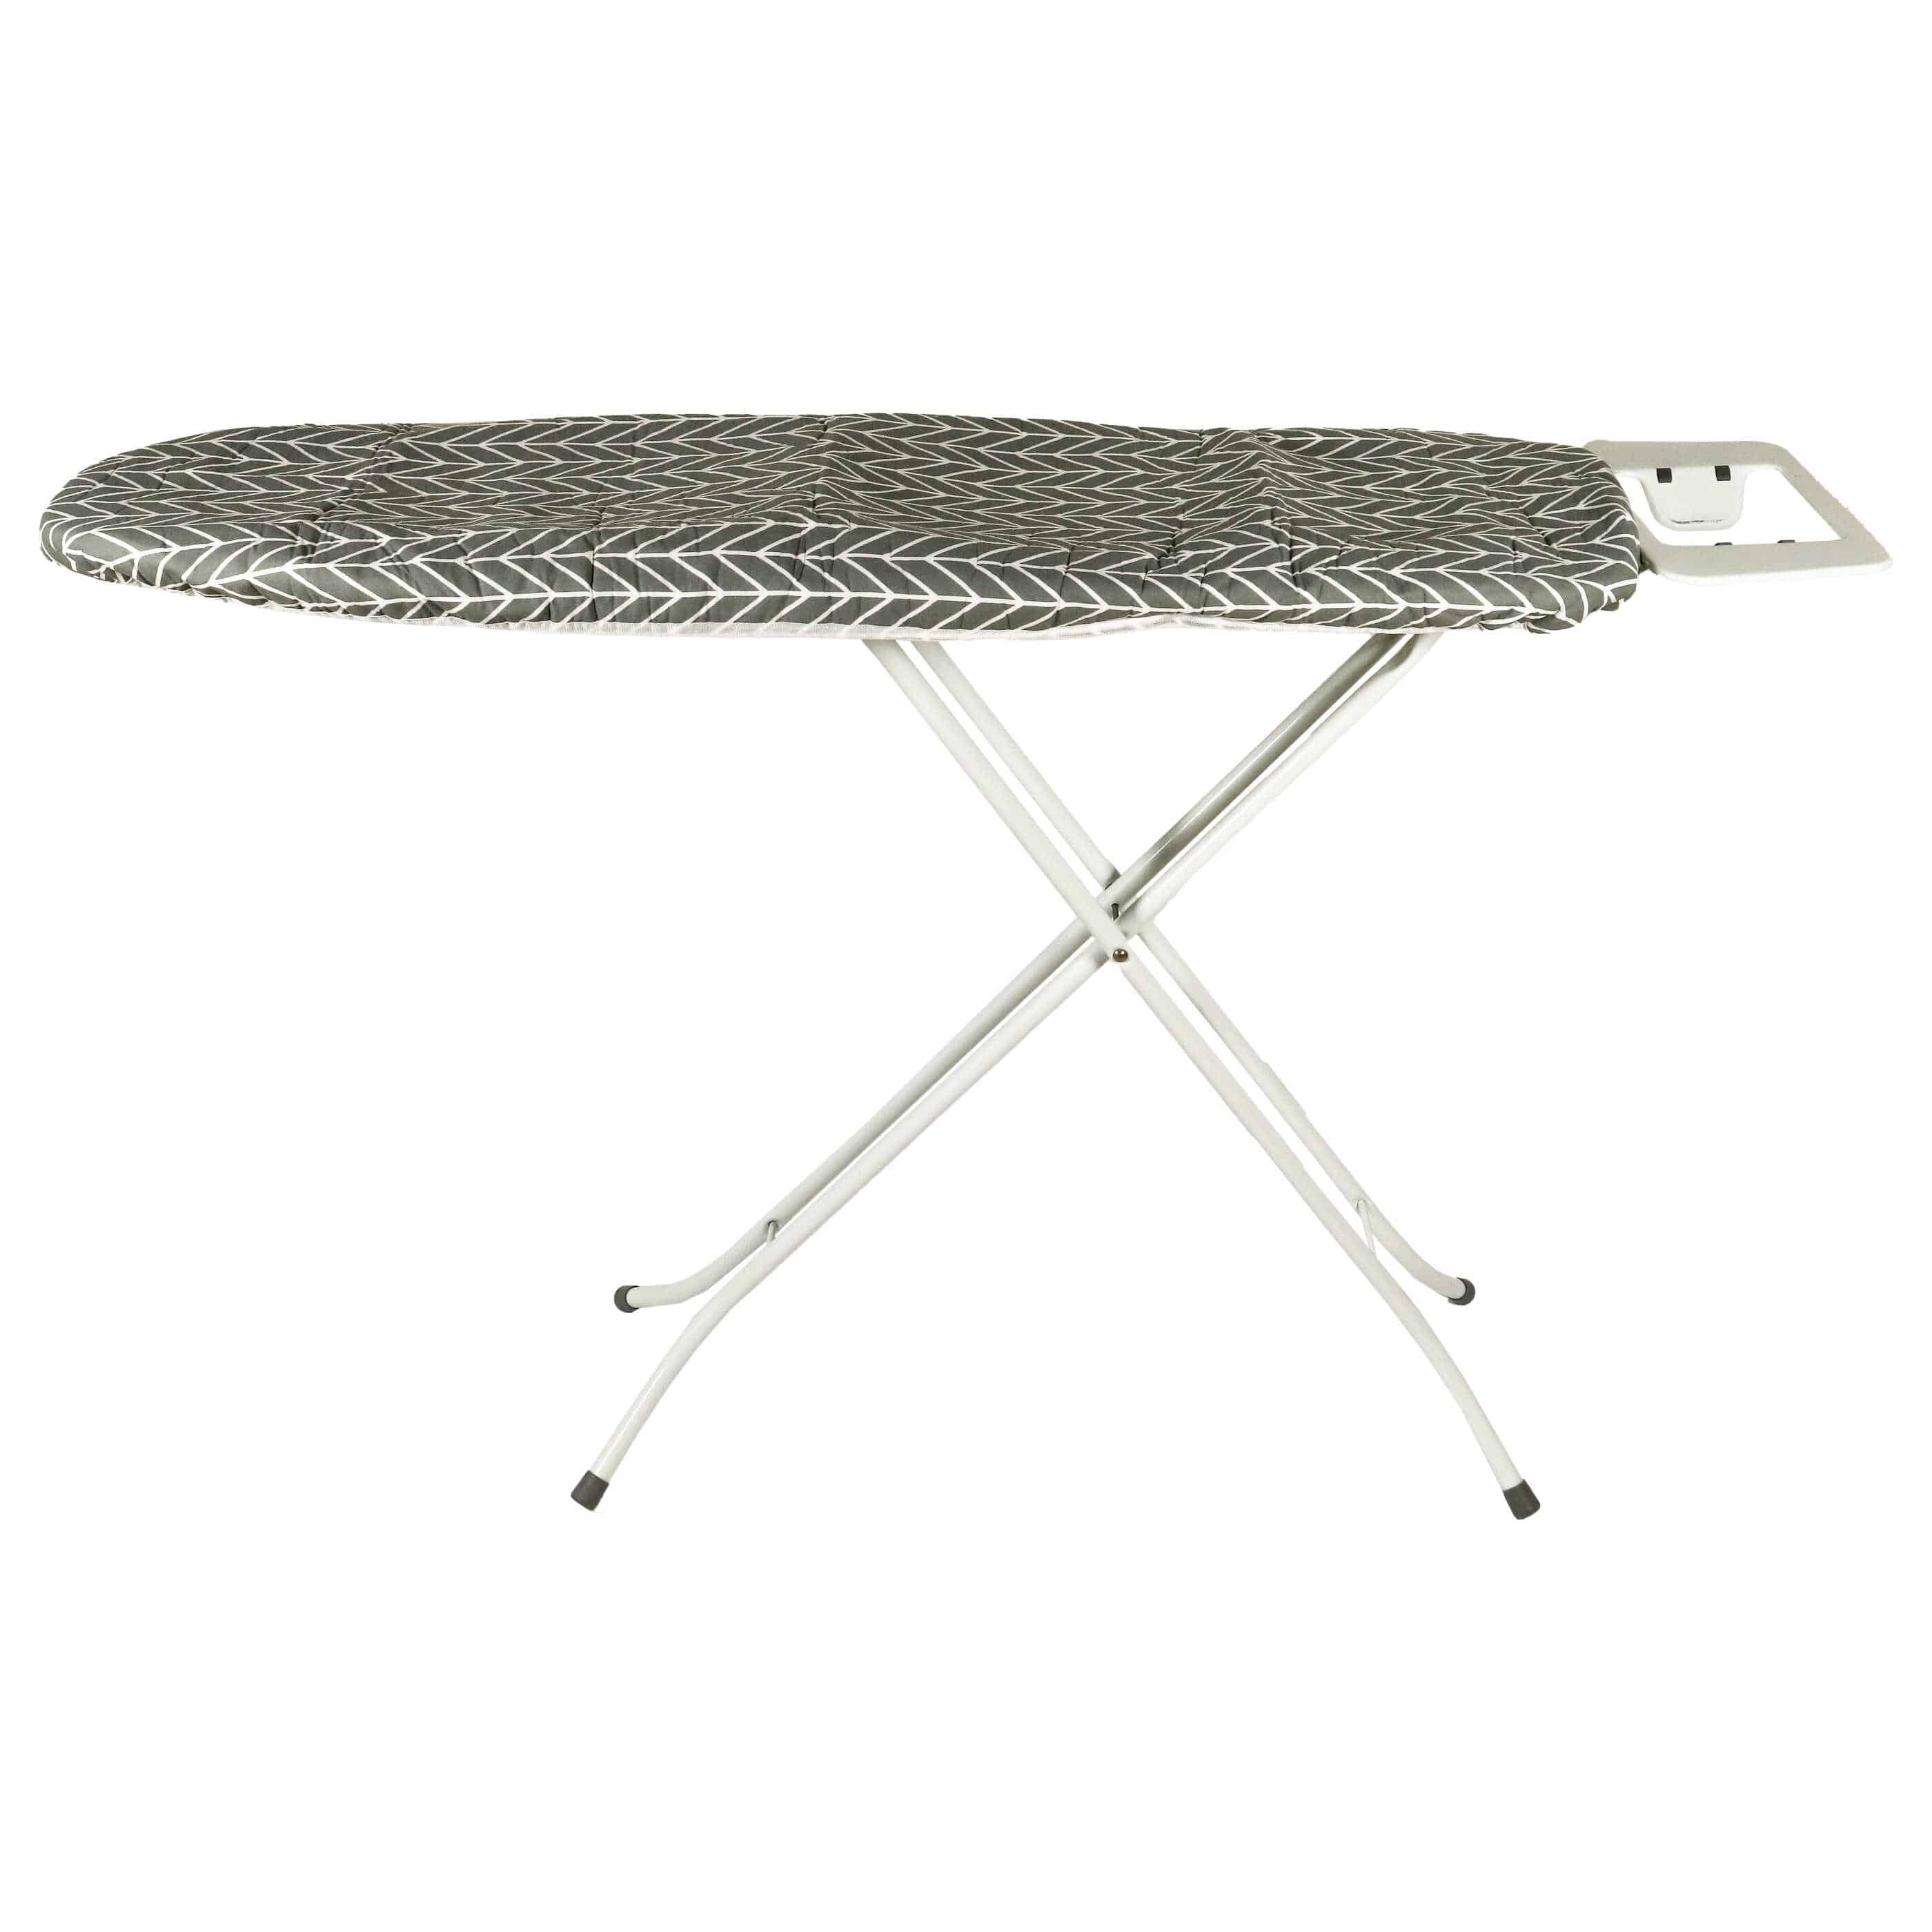 Ironing Board Cover replaces Laurastar 5607804785, MyCover for Laurastar Ironing Board - Ironing Board Cover